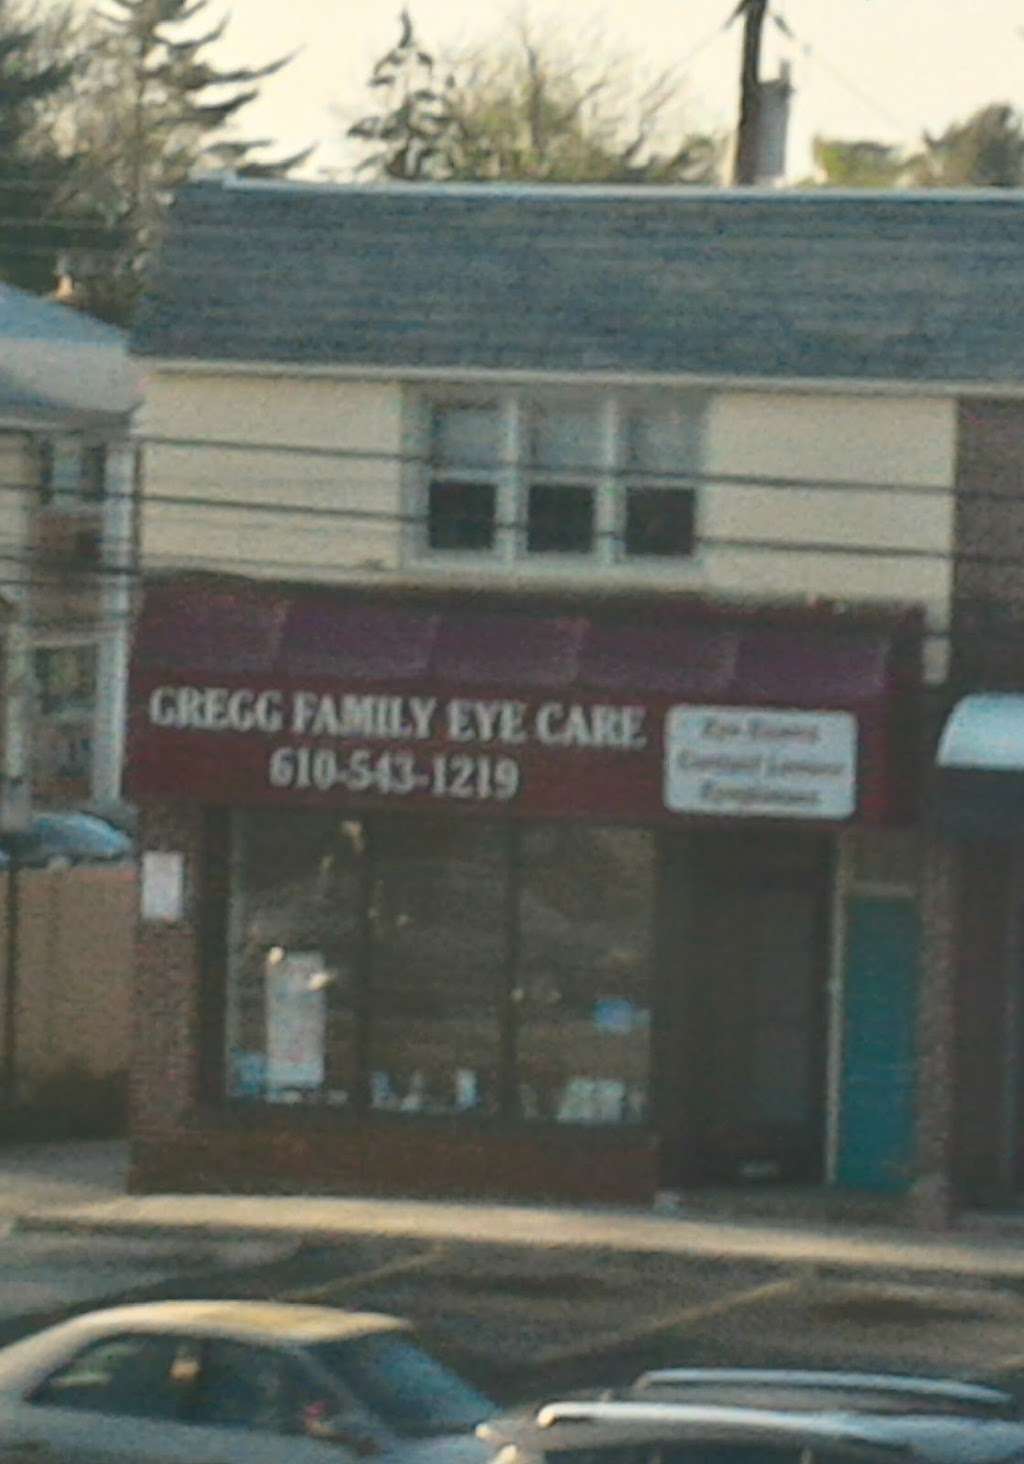 Gregg Family Eye Care | 1266 Providence Rd, Clifton Heights, PA 19018 | Phone: (610) 543-1219